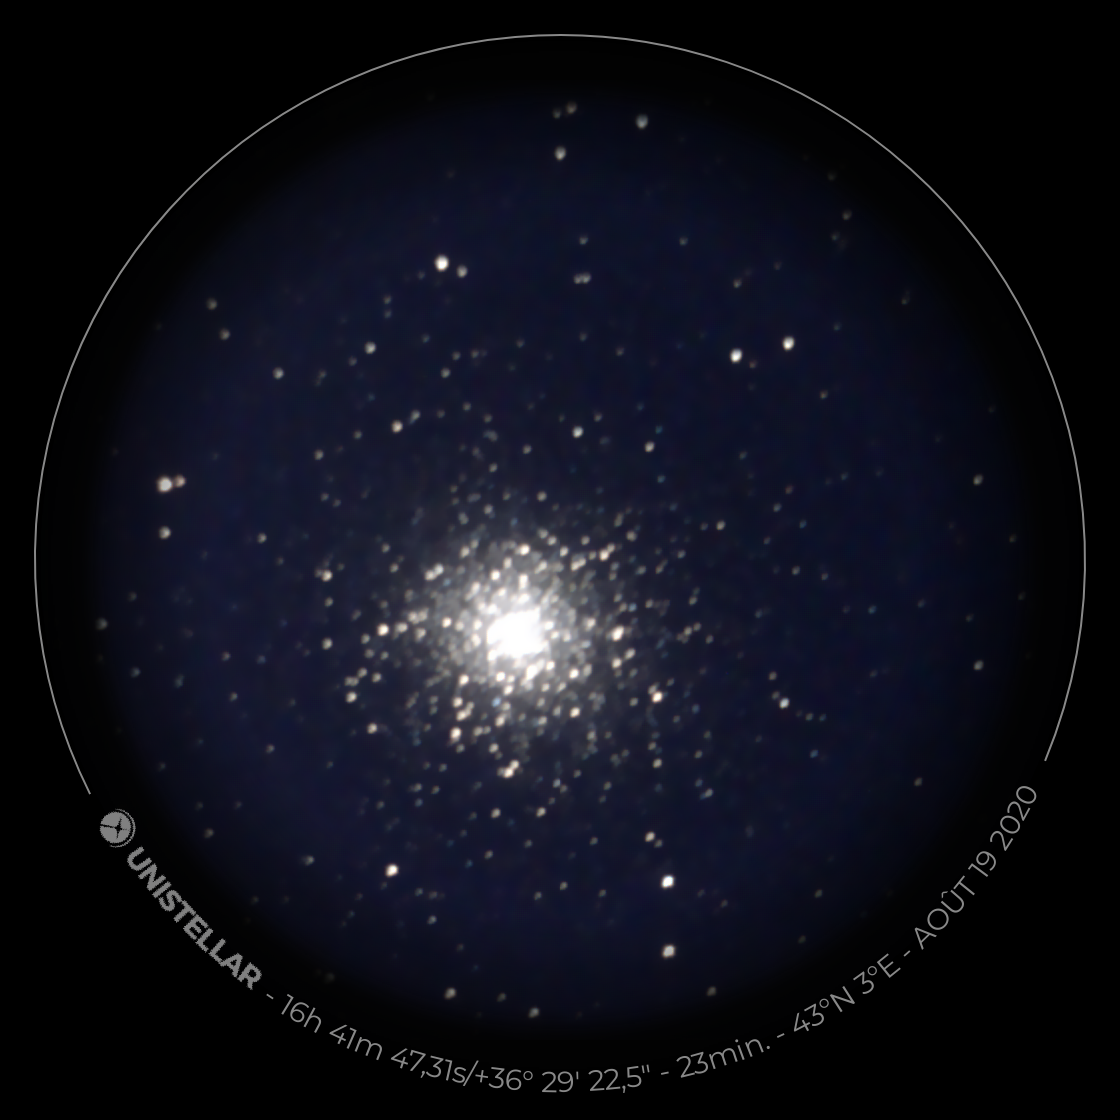 eVscope-20200818-232637.png